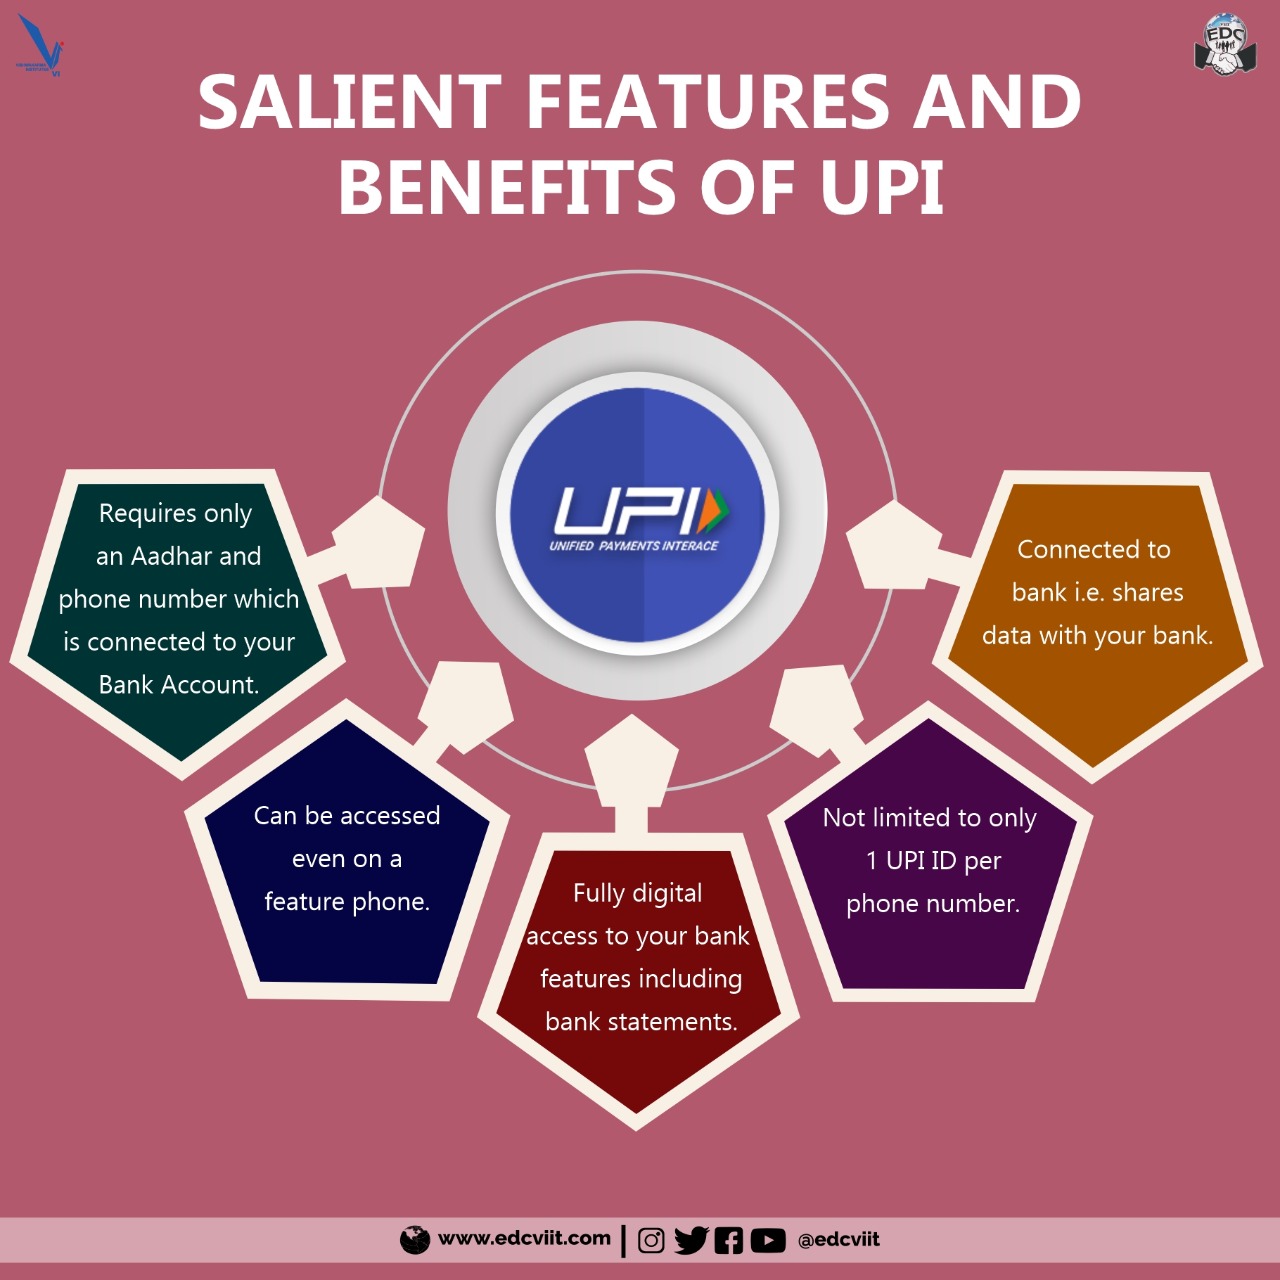 UPI - UNIFIED PAYMENTS INTERFACE